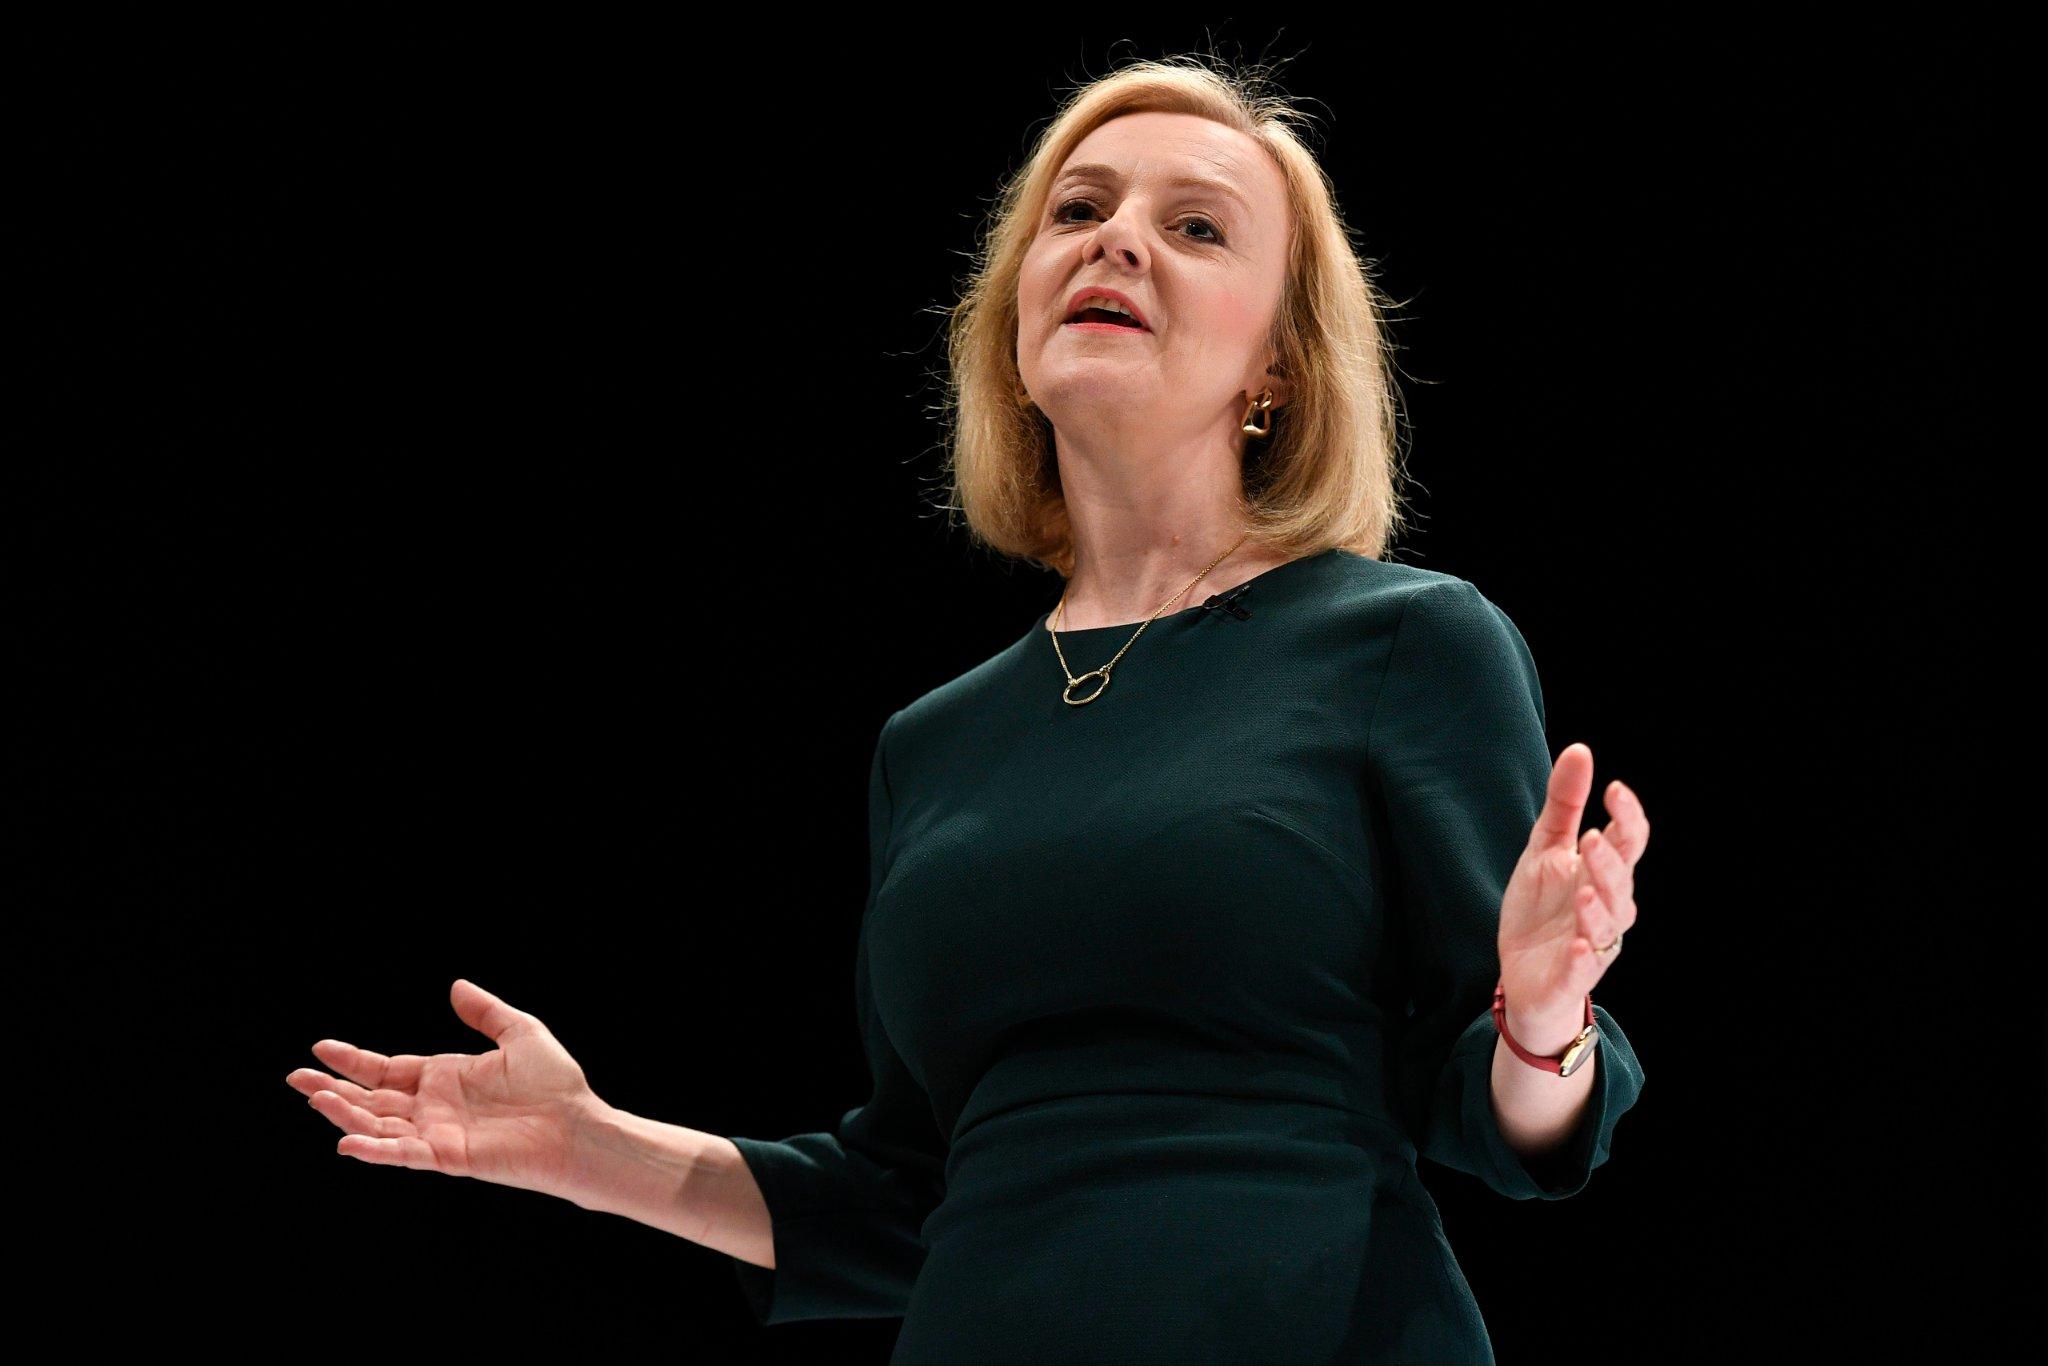 "Putin will be defeated": what Liz Truss, elected Prime Minister of Britain, promised about the war between Ukraine and the Russian Federation